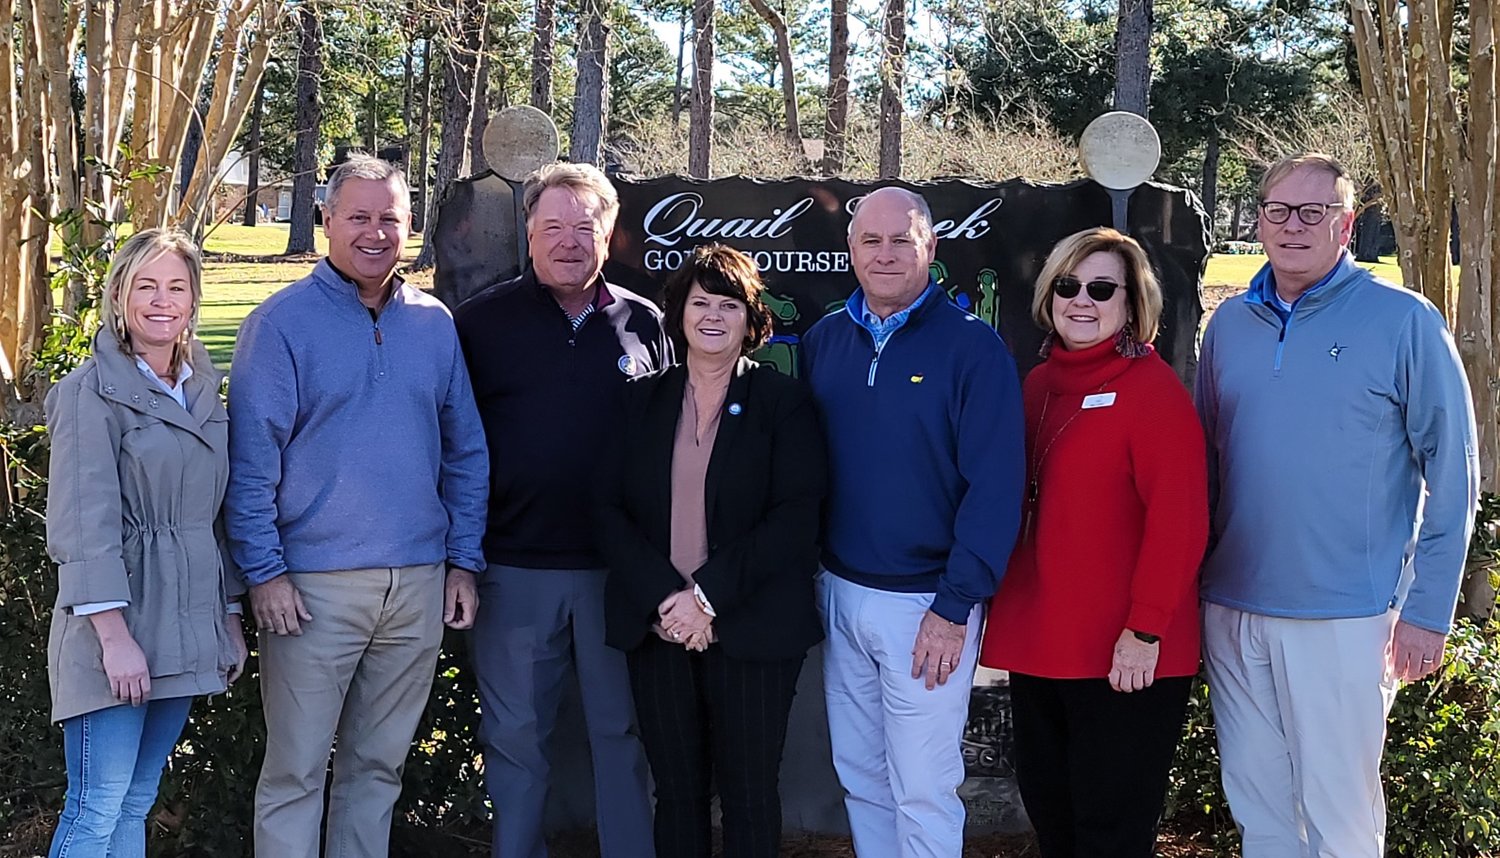 Pictured here, from left: Betsy Duggar, FEEF Board Member; Mike Foley, Golf Tournament Co-chair; Bobby Hall, Director of Golf Operations, Quail Creek Golf Course; Fairhope Mayor Sherry Sullivan; Jake Defee, Golf Tournament Co-chair; Meg Lowry, FEEF Executive Director; and Davis Brock, FEEF Board Chairman.